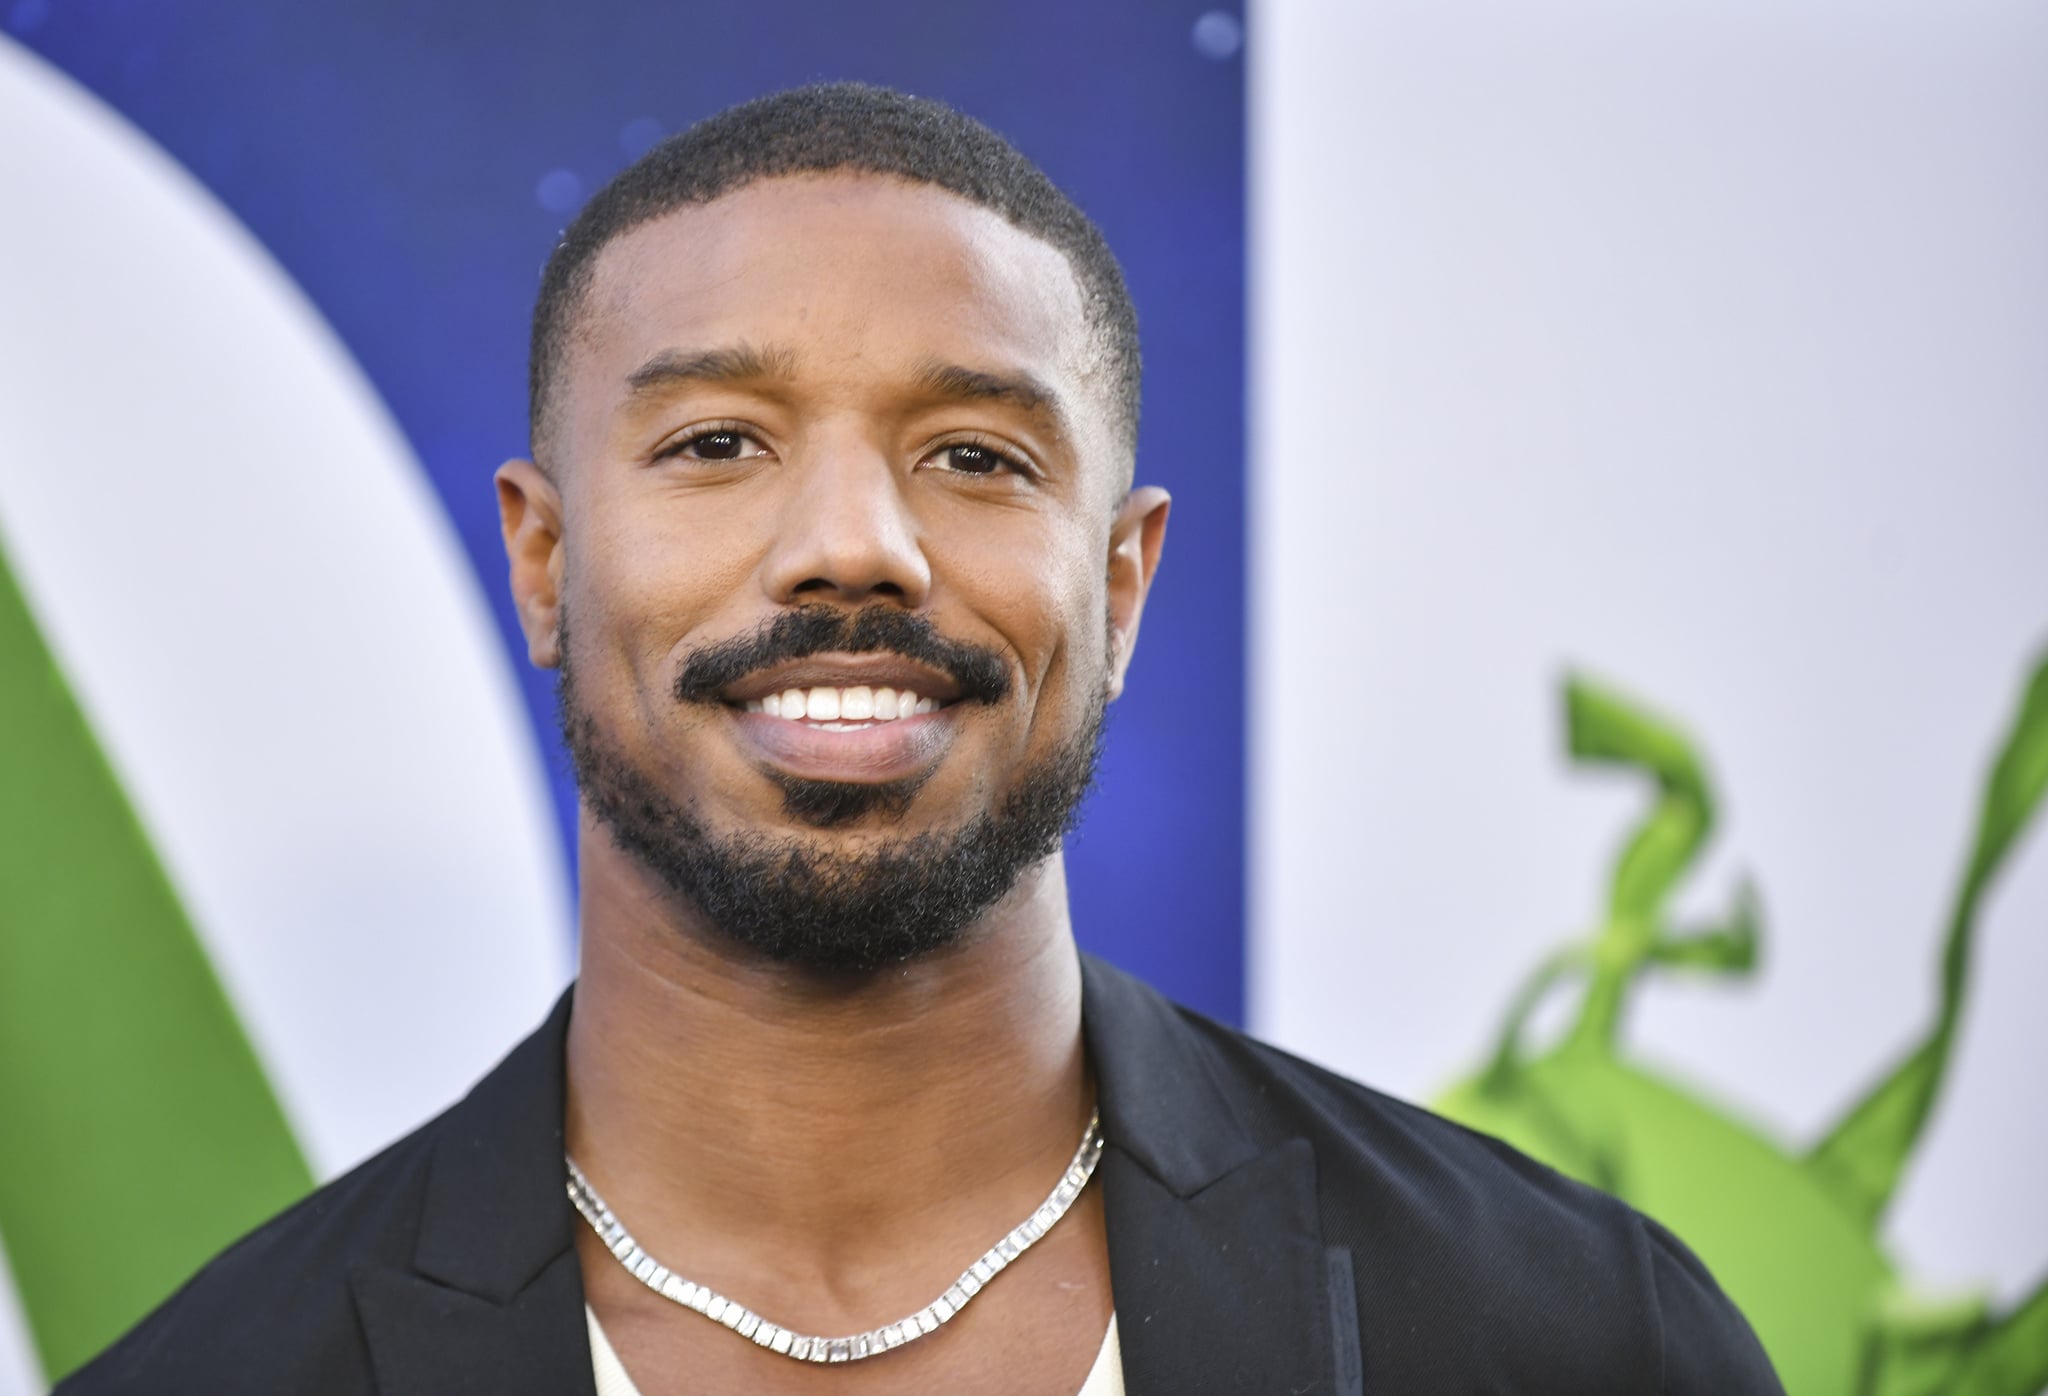 HOLLYWOOD, CALIFORNIA - JULY 18: Michael B. Jordan attends the world premiere of Universal Pictures' 